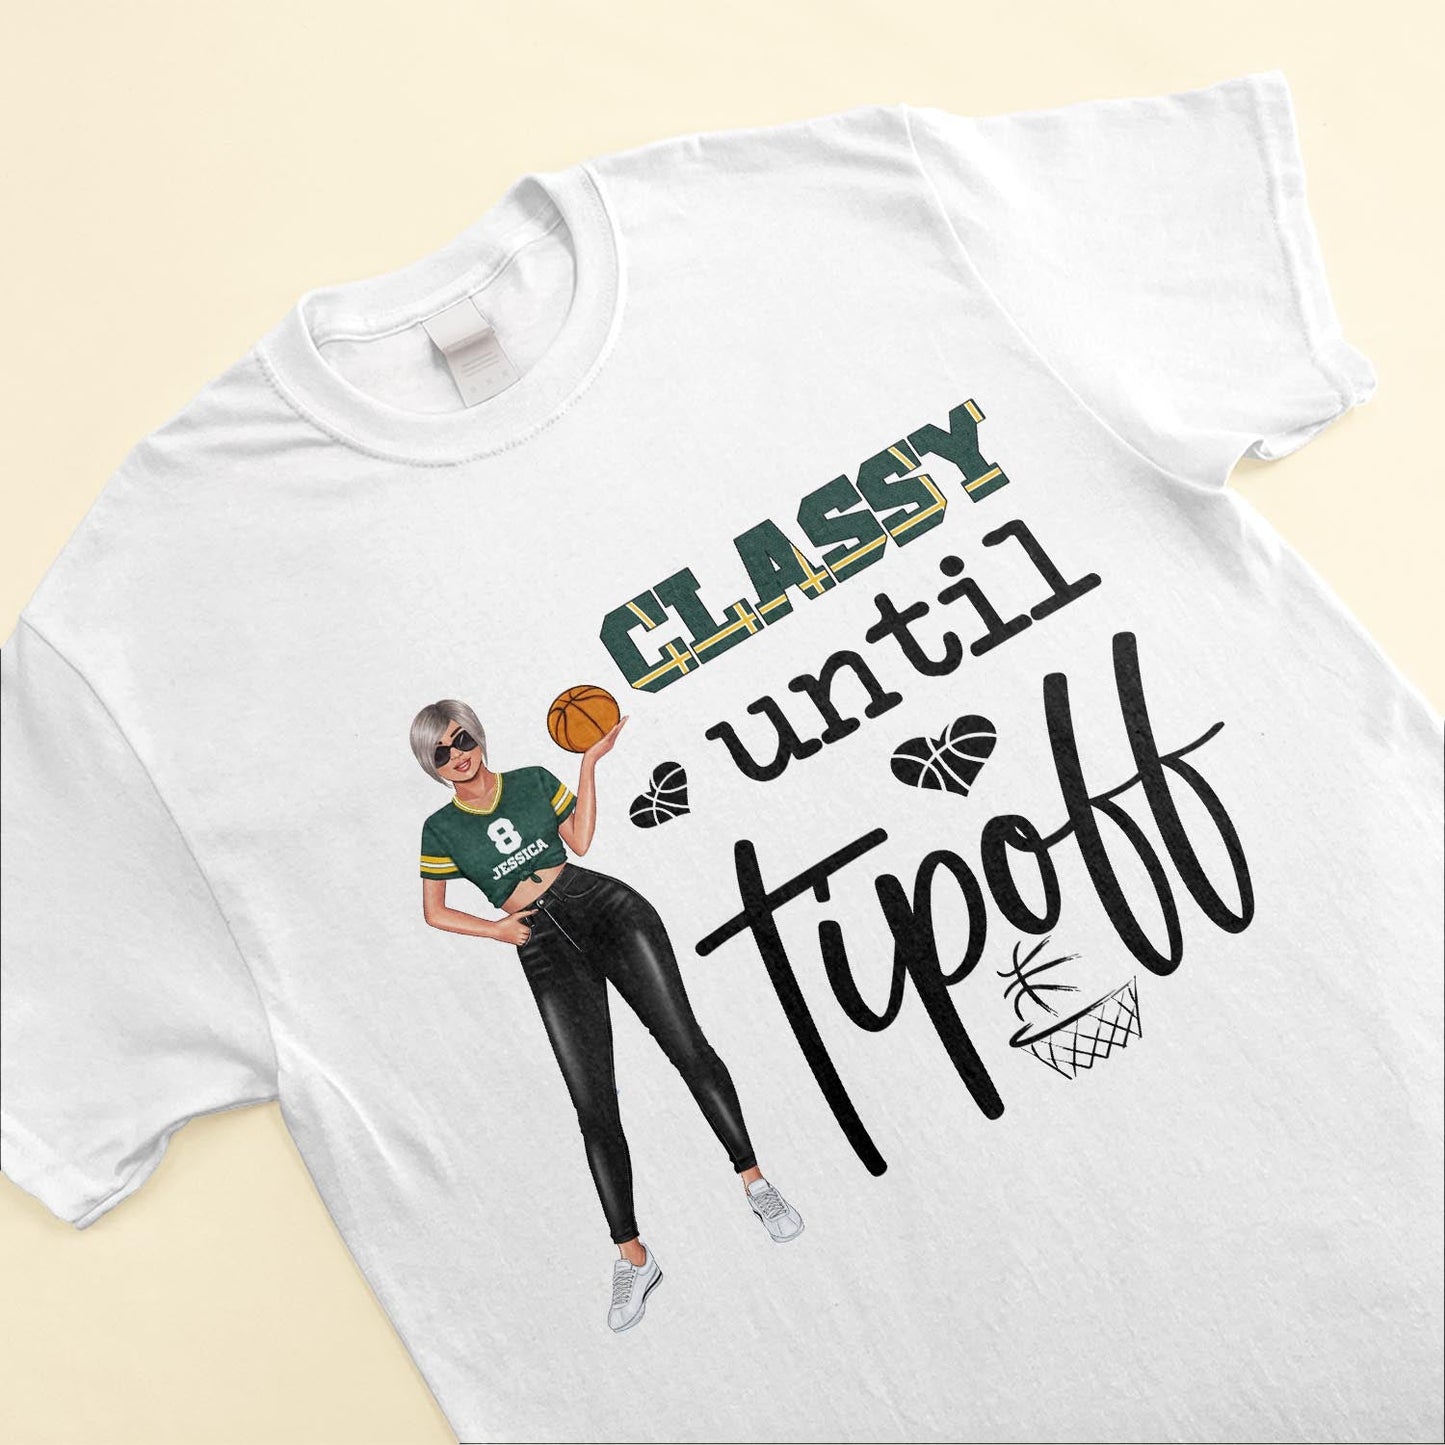 Classy Until Tipoff - Personalized Shirt